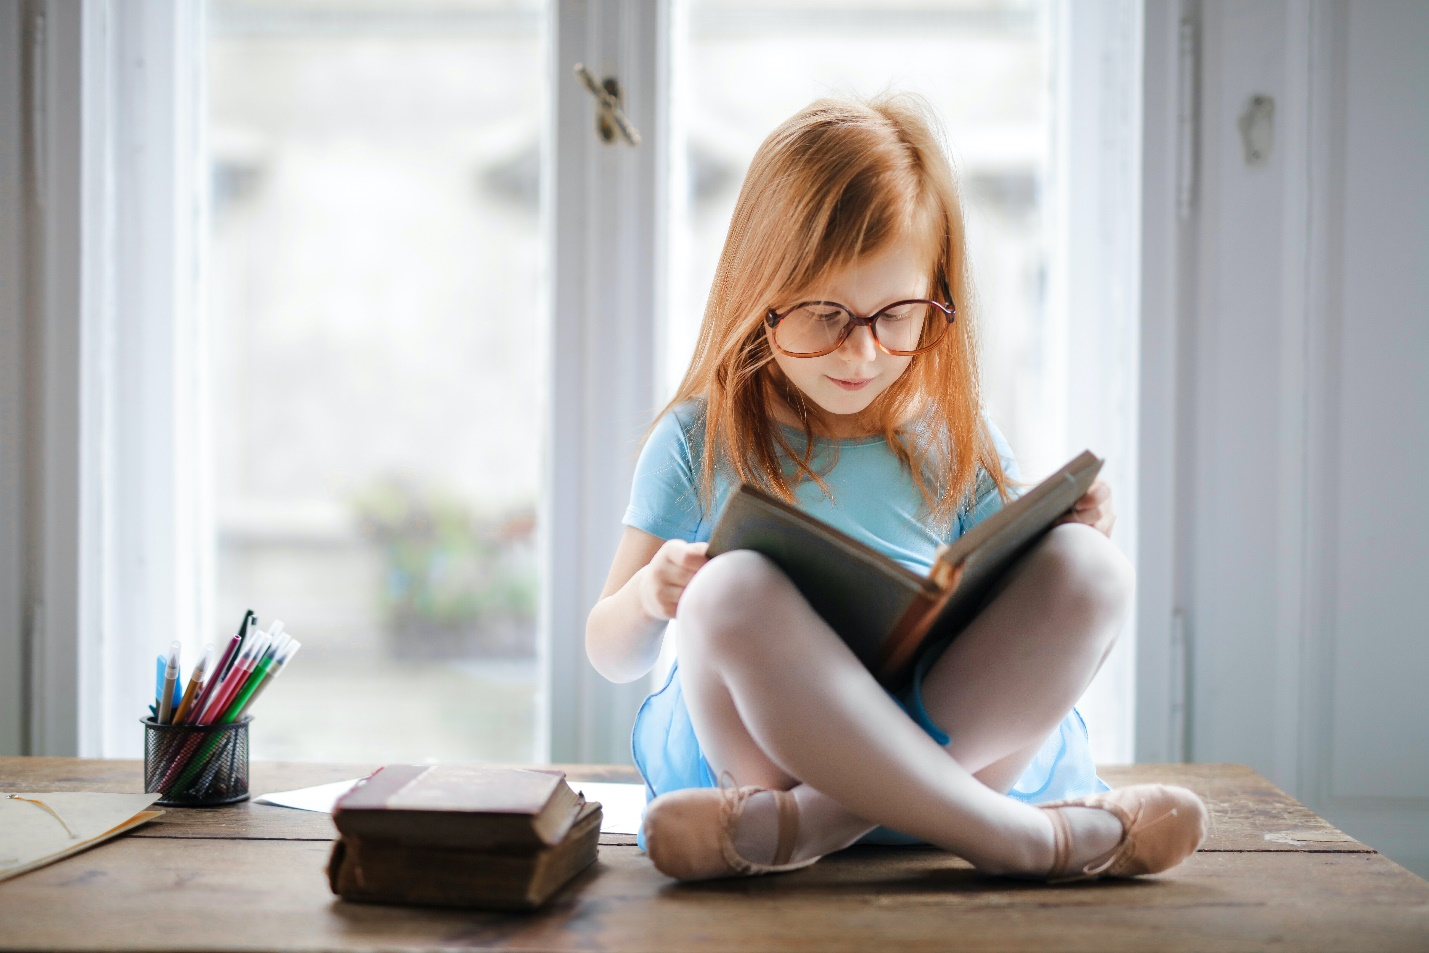 A young girl child sits cross-legged reading on a table beside two stacked books and a holder full of markers